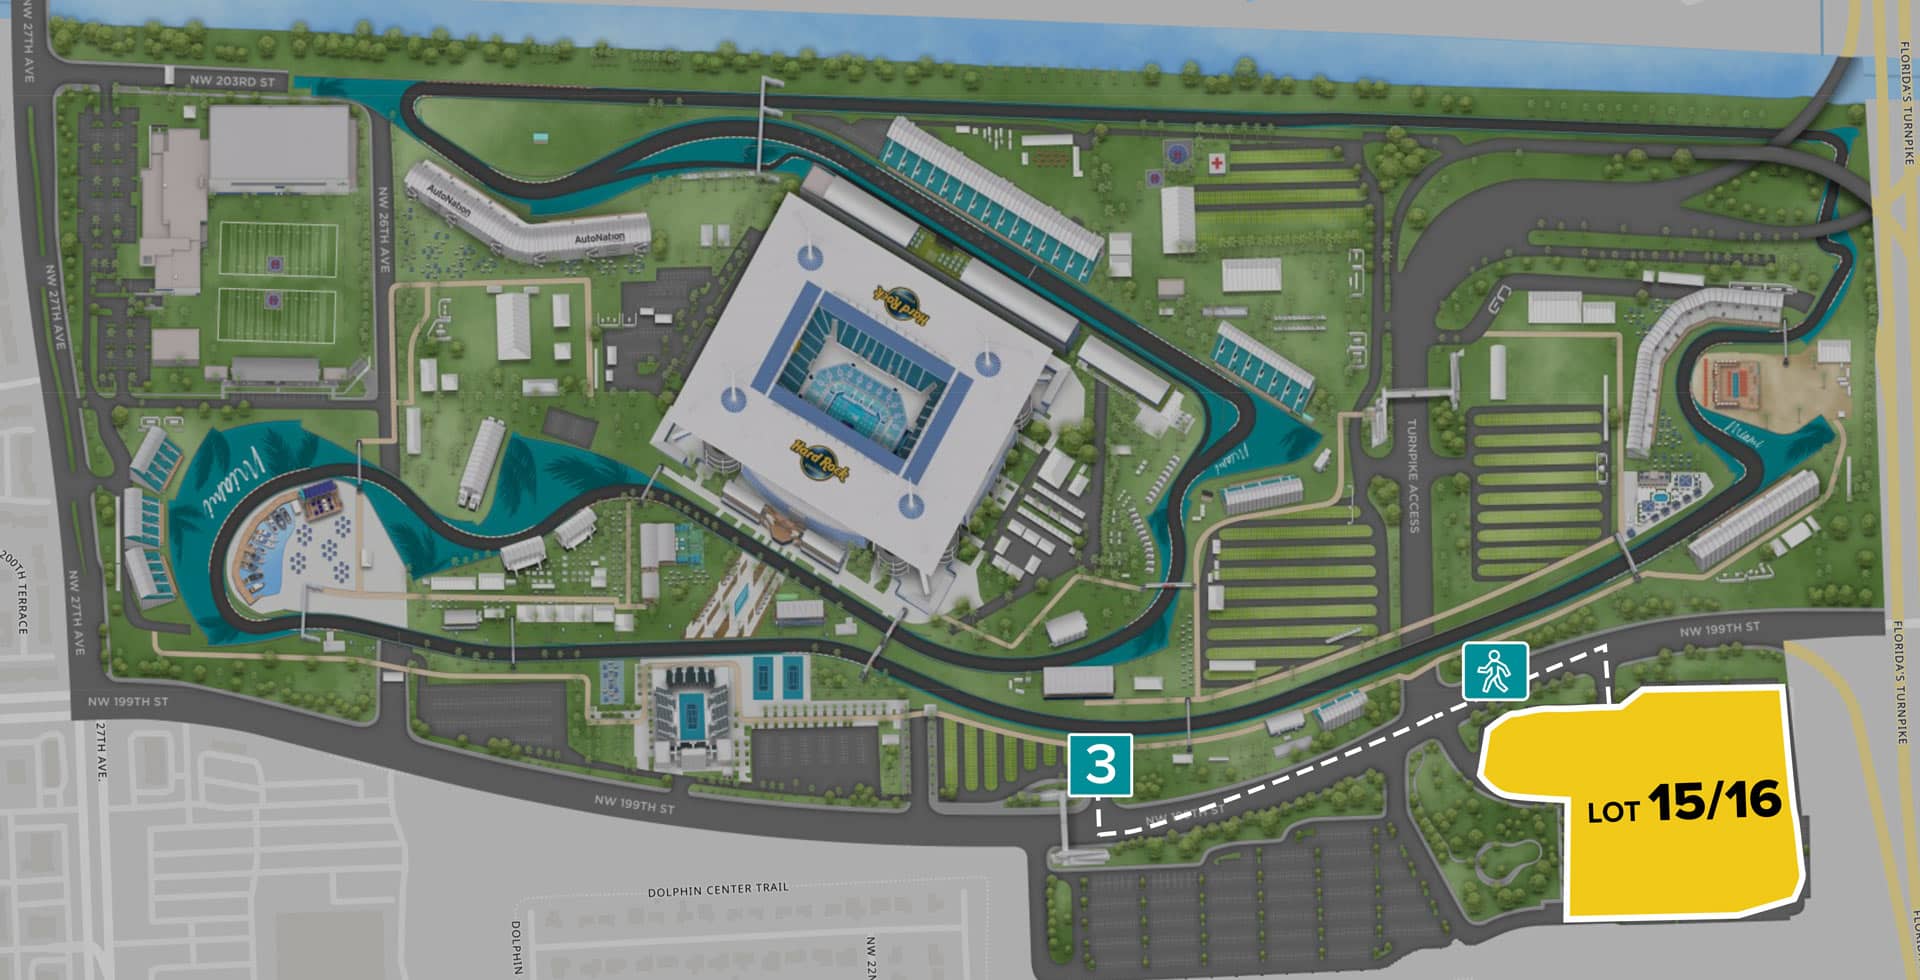 Parking Lot Location Map for Yellow Lot 15/16 at the Formula 1 Crypto.com Miami Grand Prix